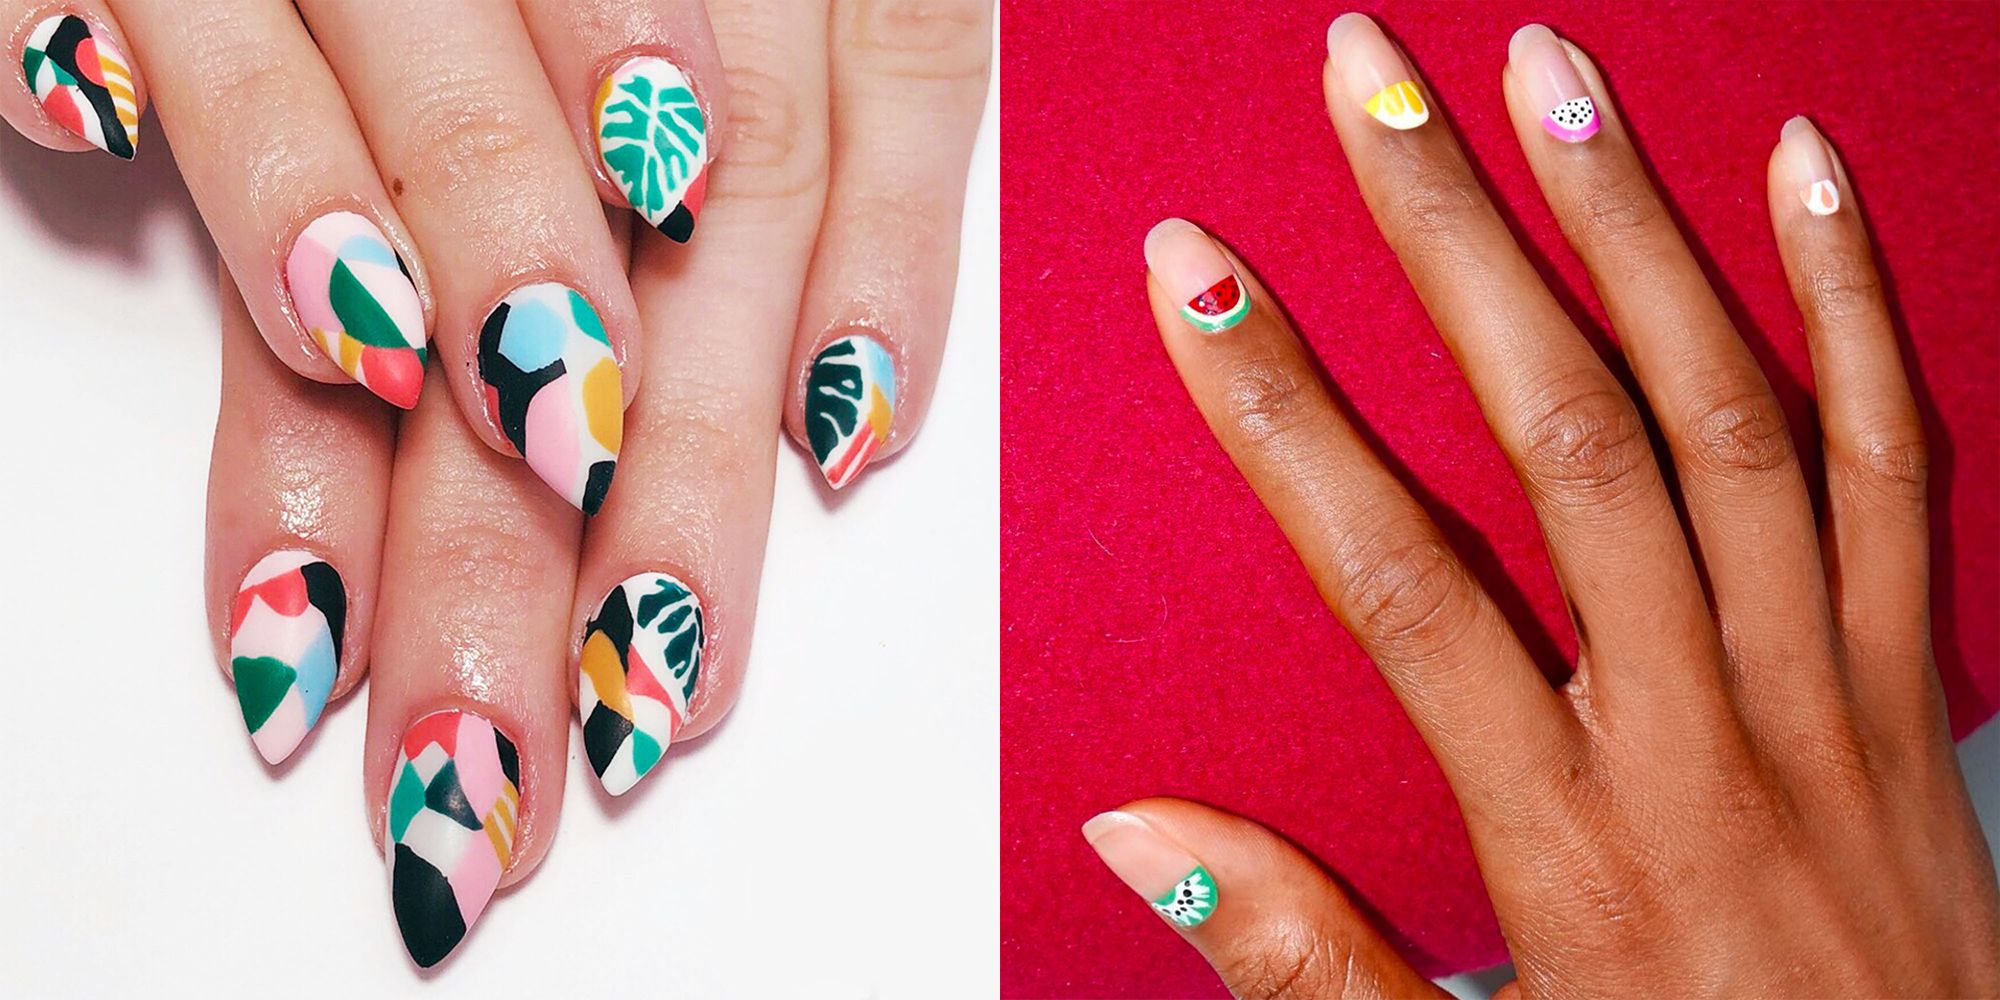 7. Quick and Easy Nail Designs for Busy People - wide 2